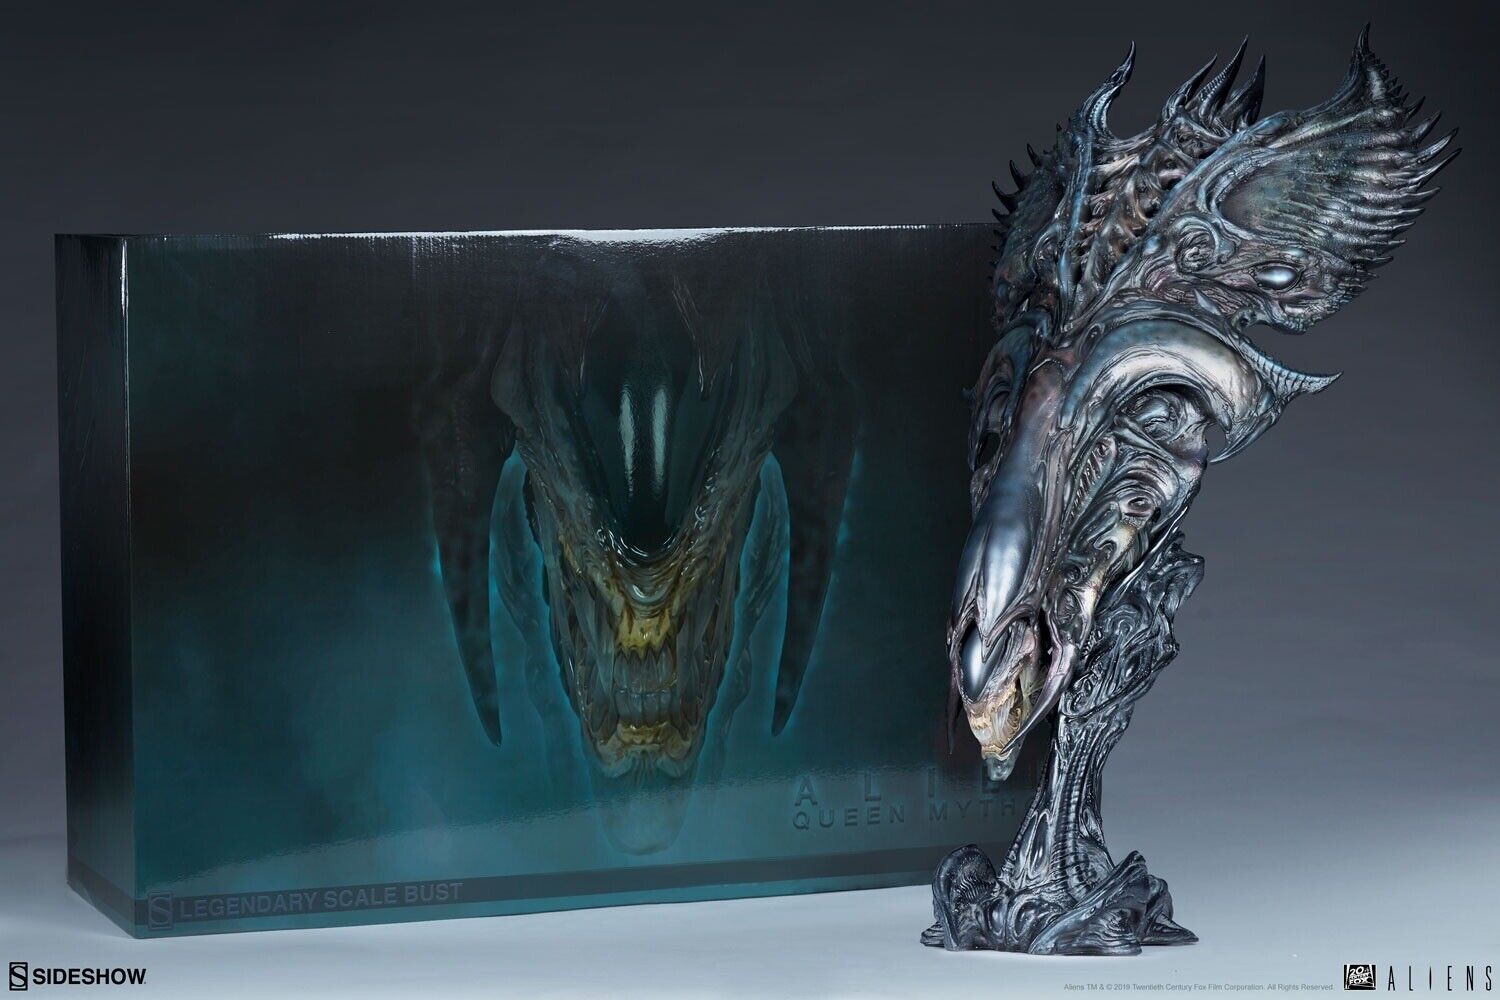 Sideshow Alien Queen Mythos Bust - BRAND NEW  #148 of 250